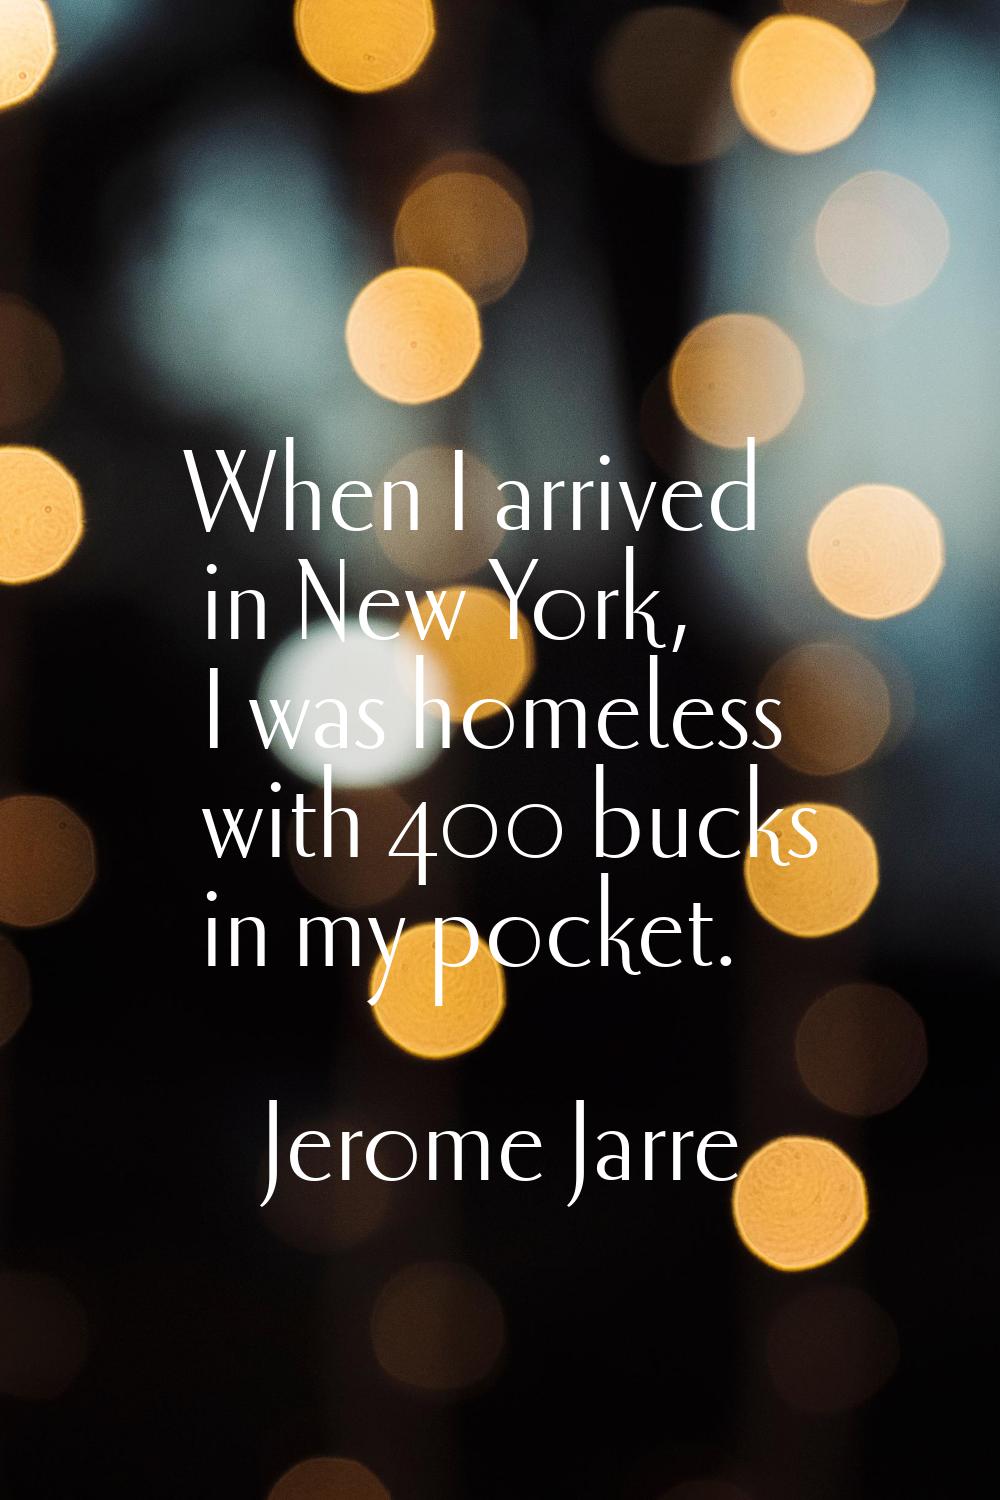 When I arrived in New York, I was homeless with 400 bucks in my pocket.